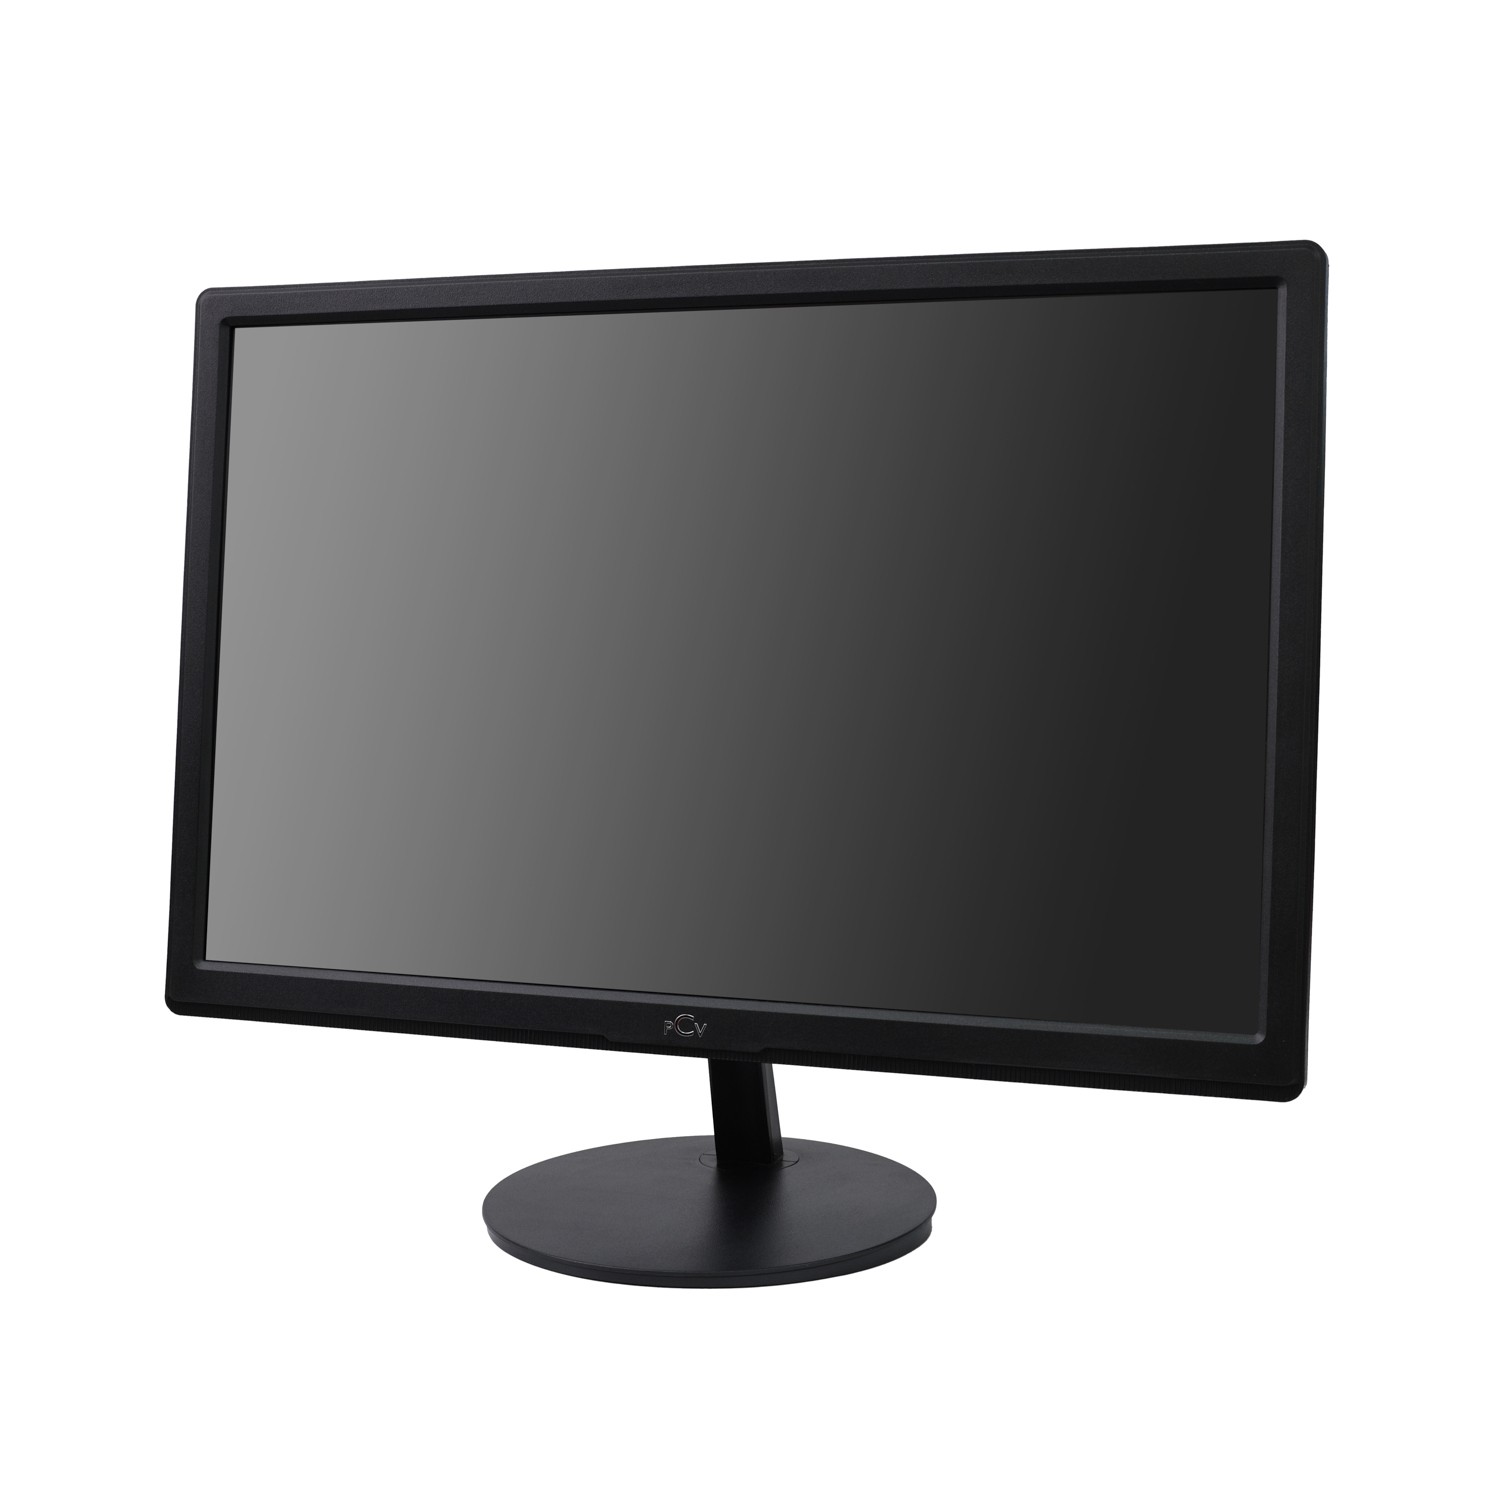 15.4 INCHES PC MONITOR